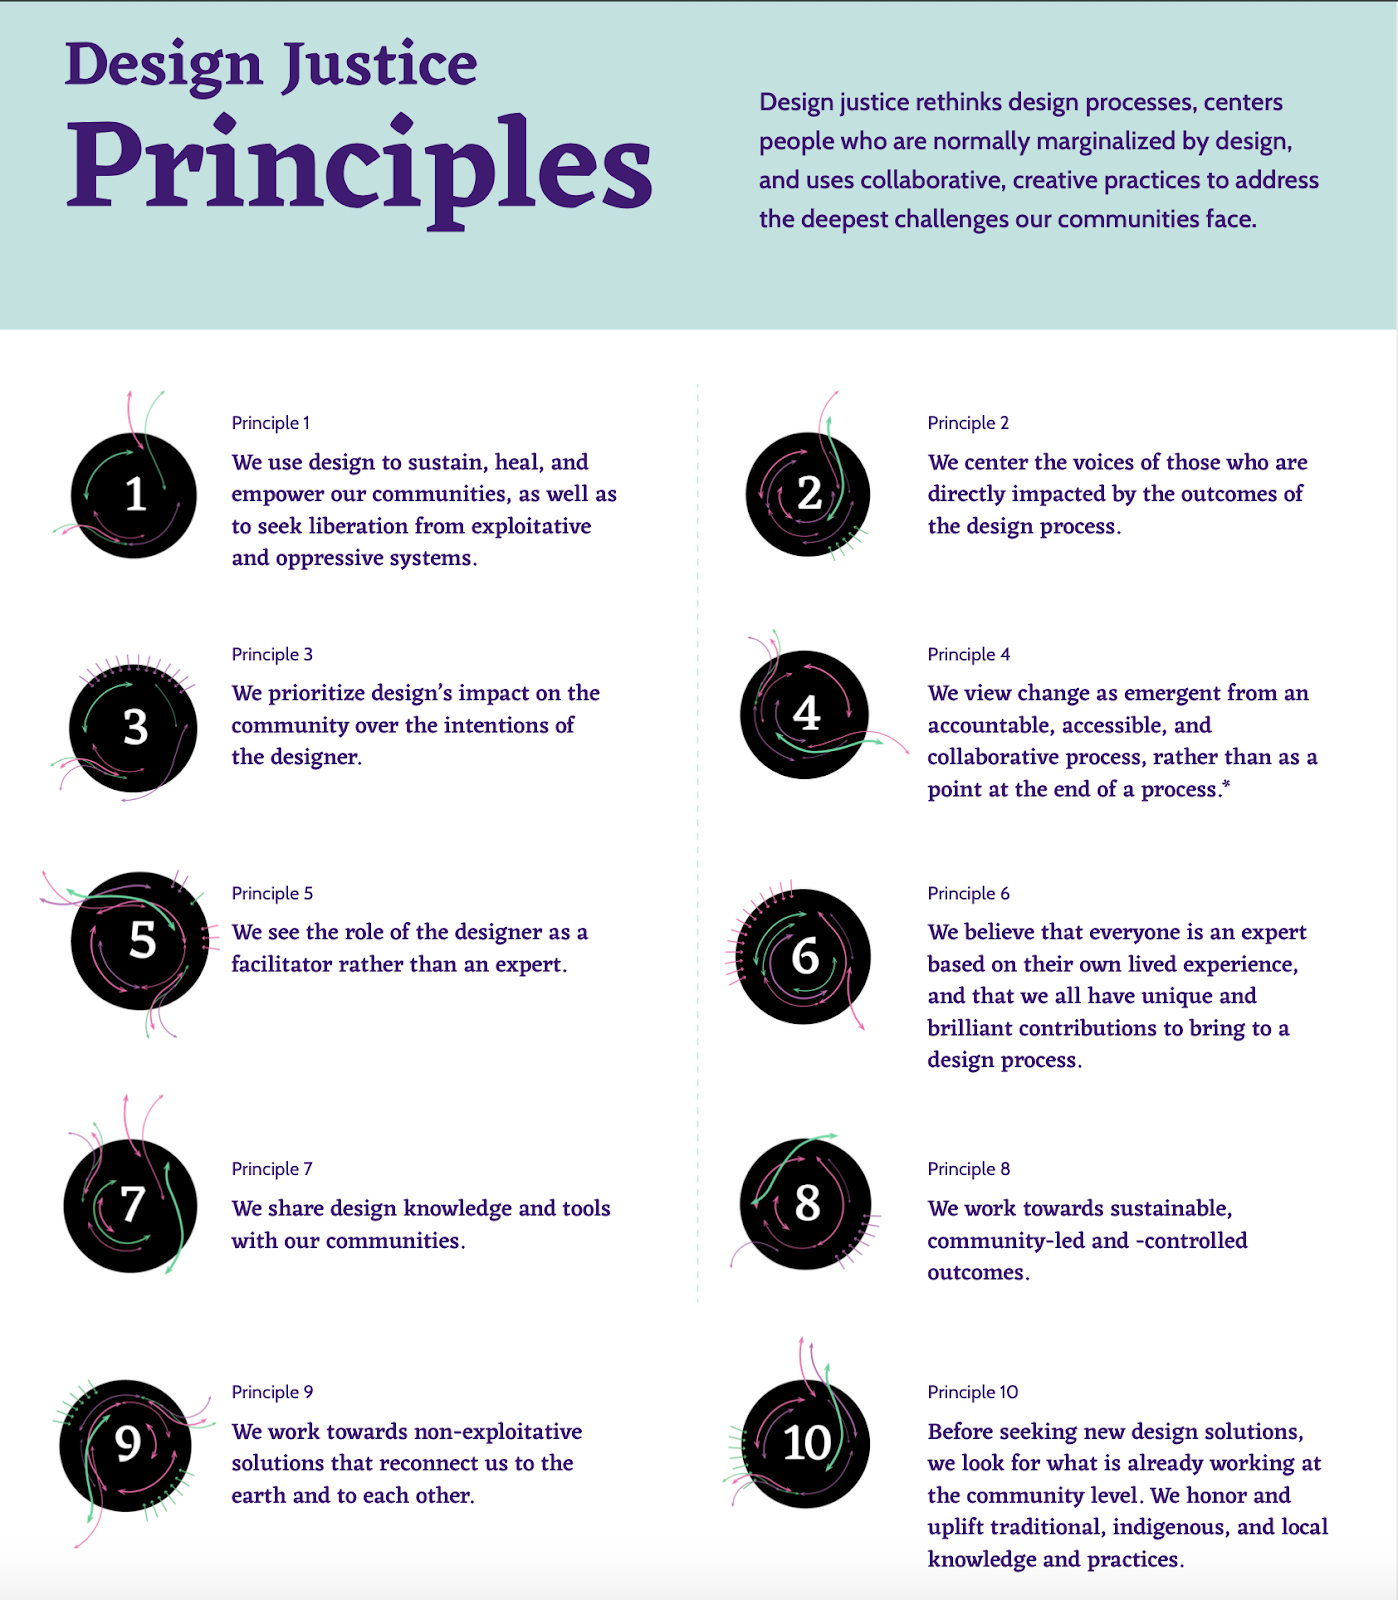 An image detailing the 10 Design Justice Network Principles, which range from 